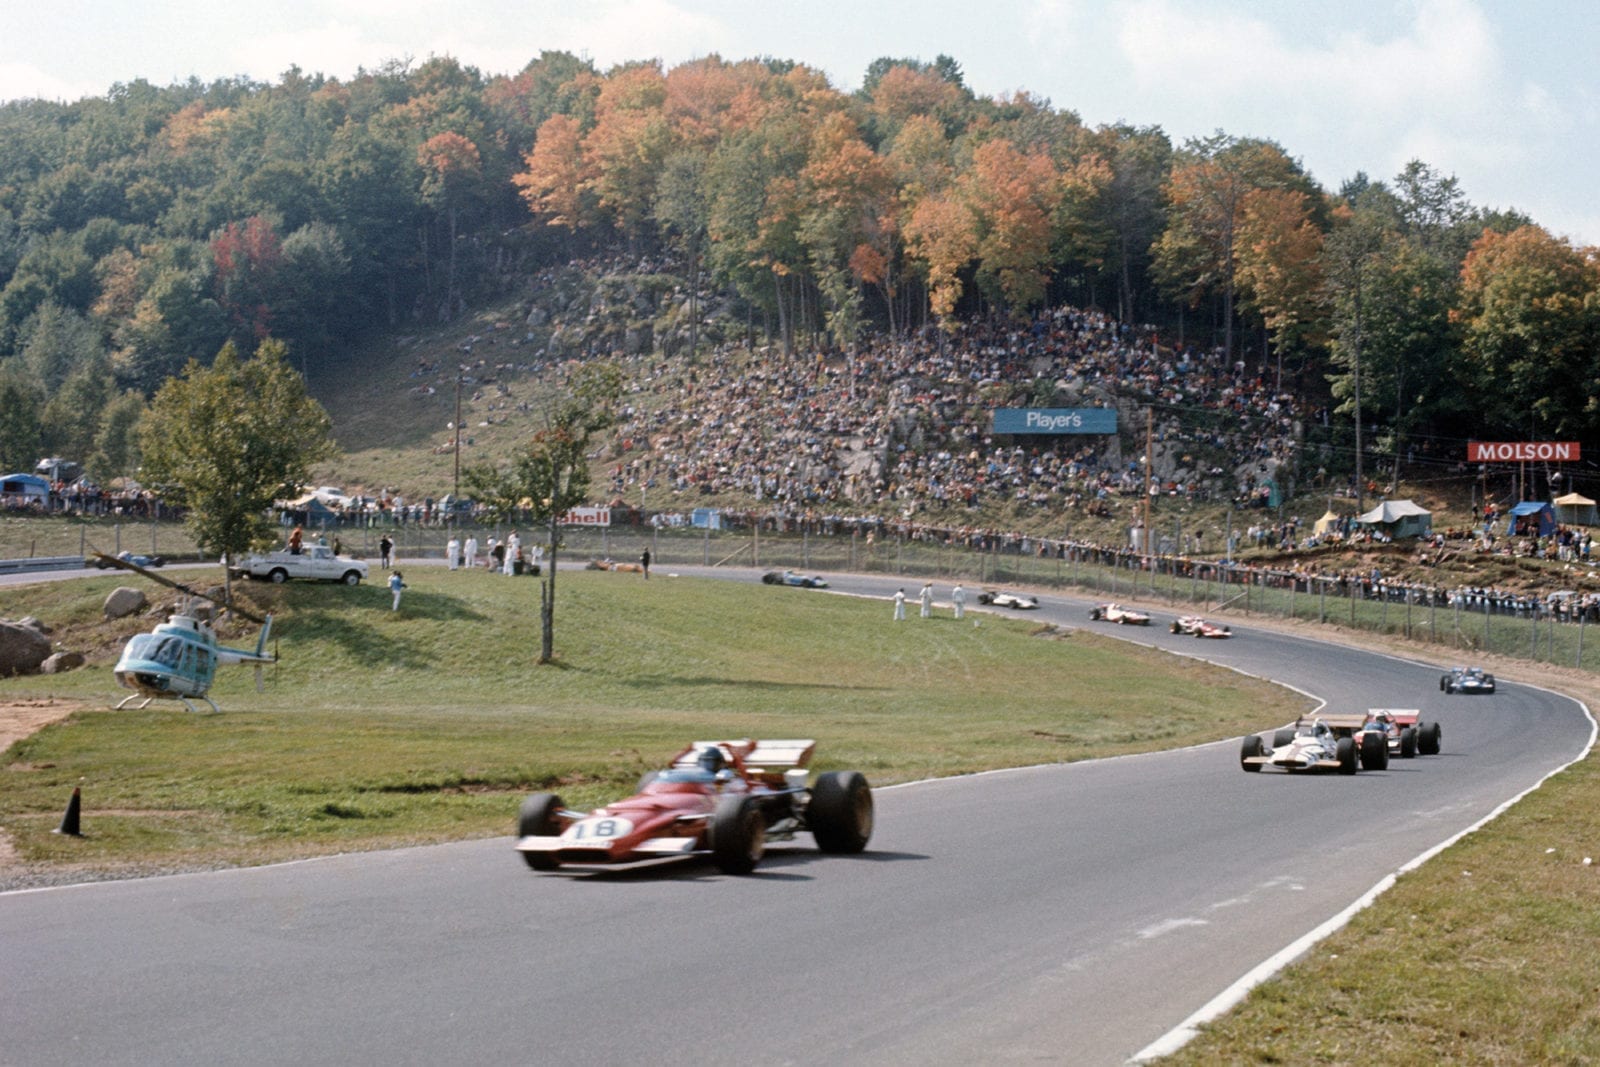 Jacky Ickx racing at Mont Tremblant in the 1970 Canadian Grand Prix